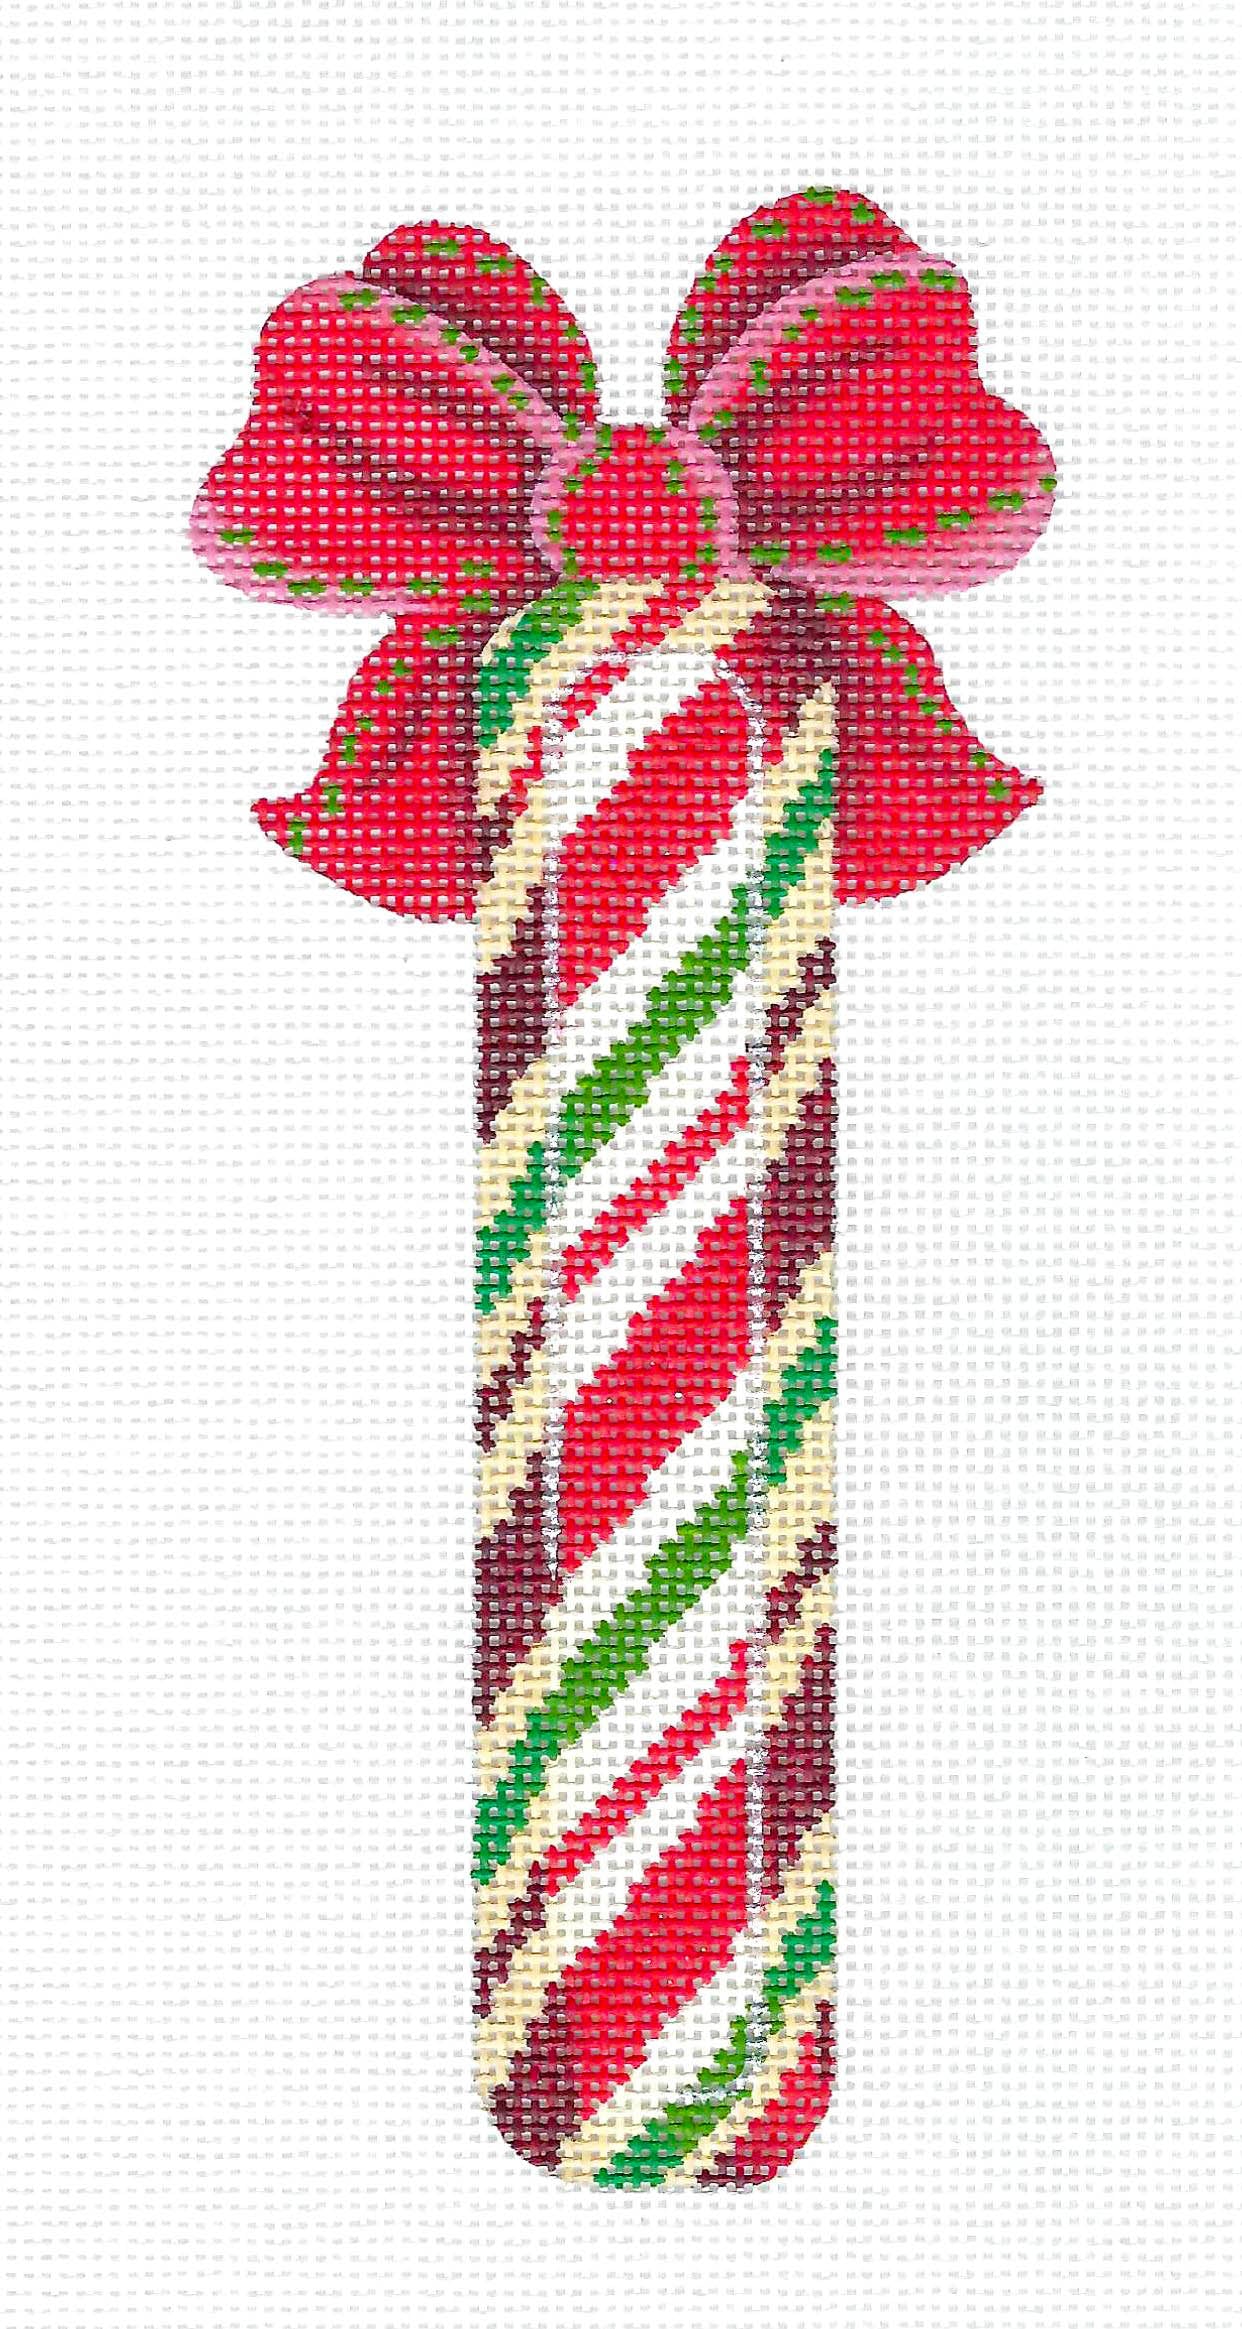 Candy Stick ~ Green, Red & White Stripes Candy Stick handpainted 18 mesh Needlepoint Canvas by Kelly Clark